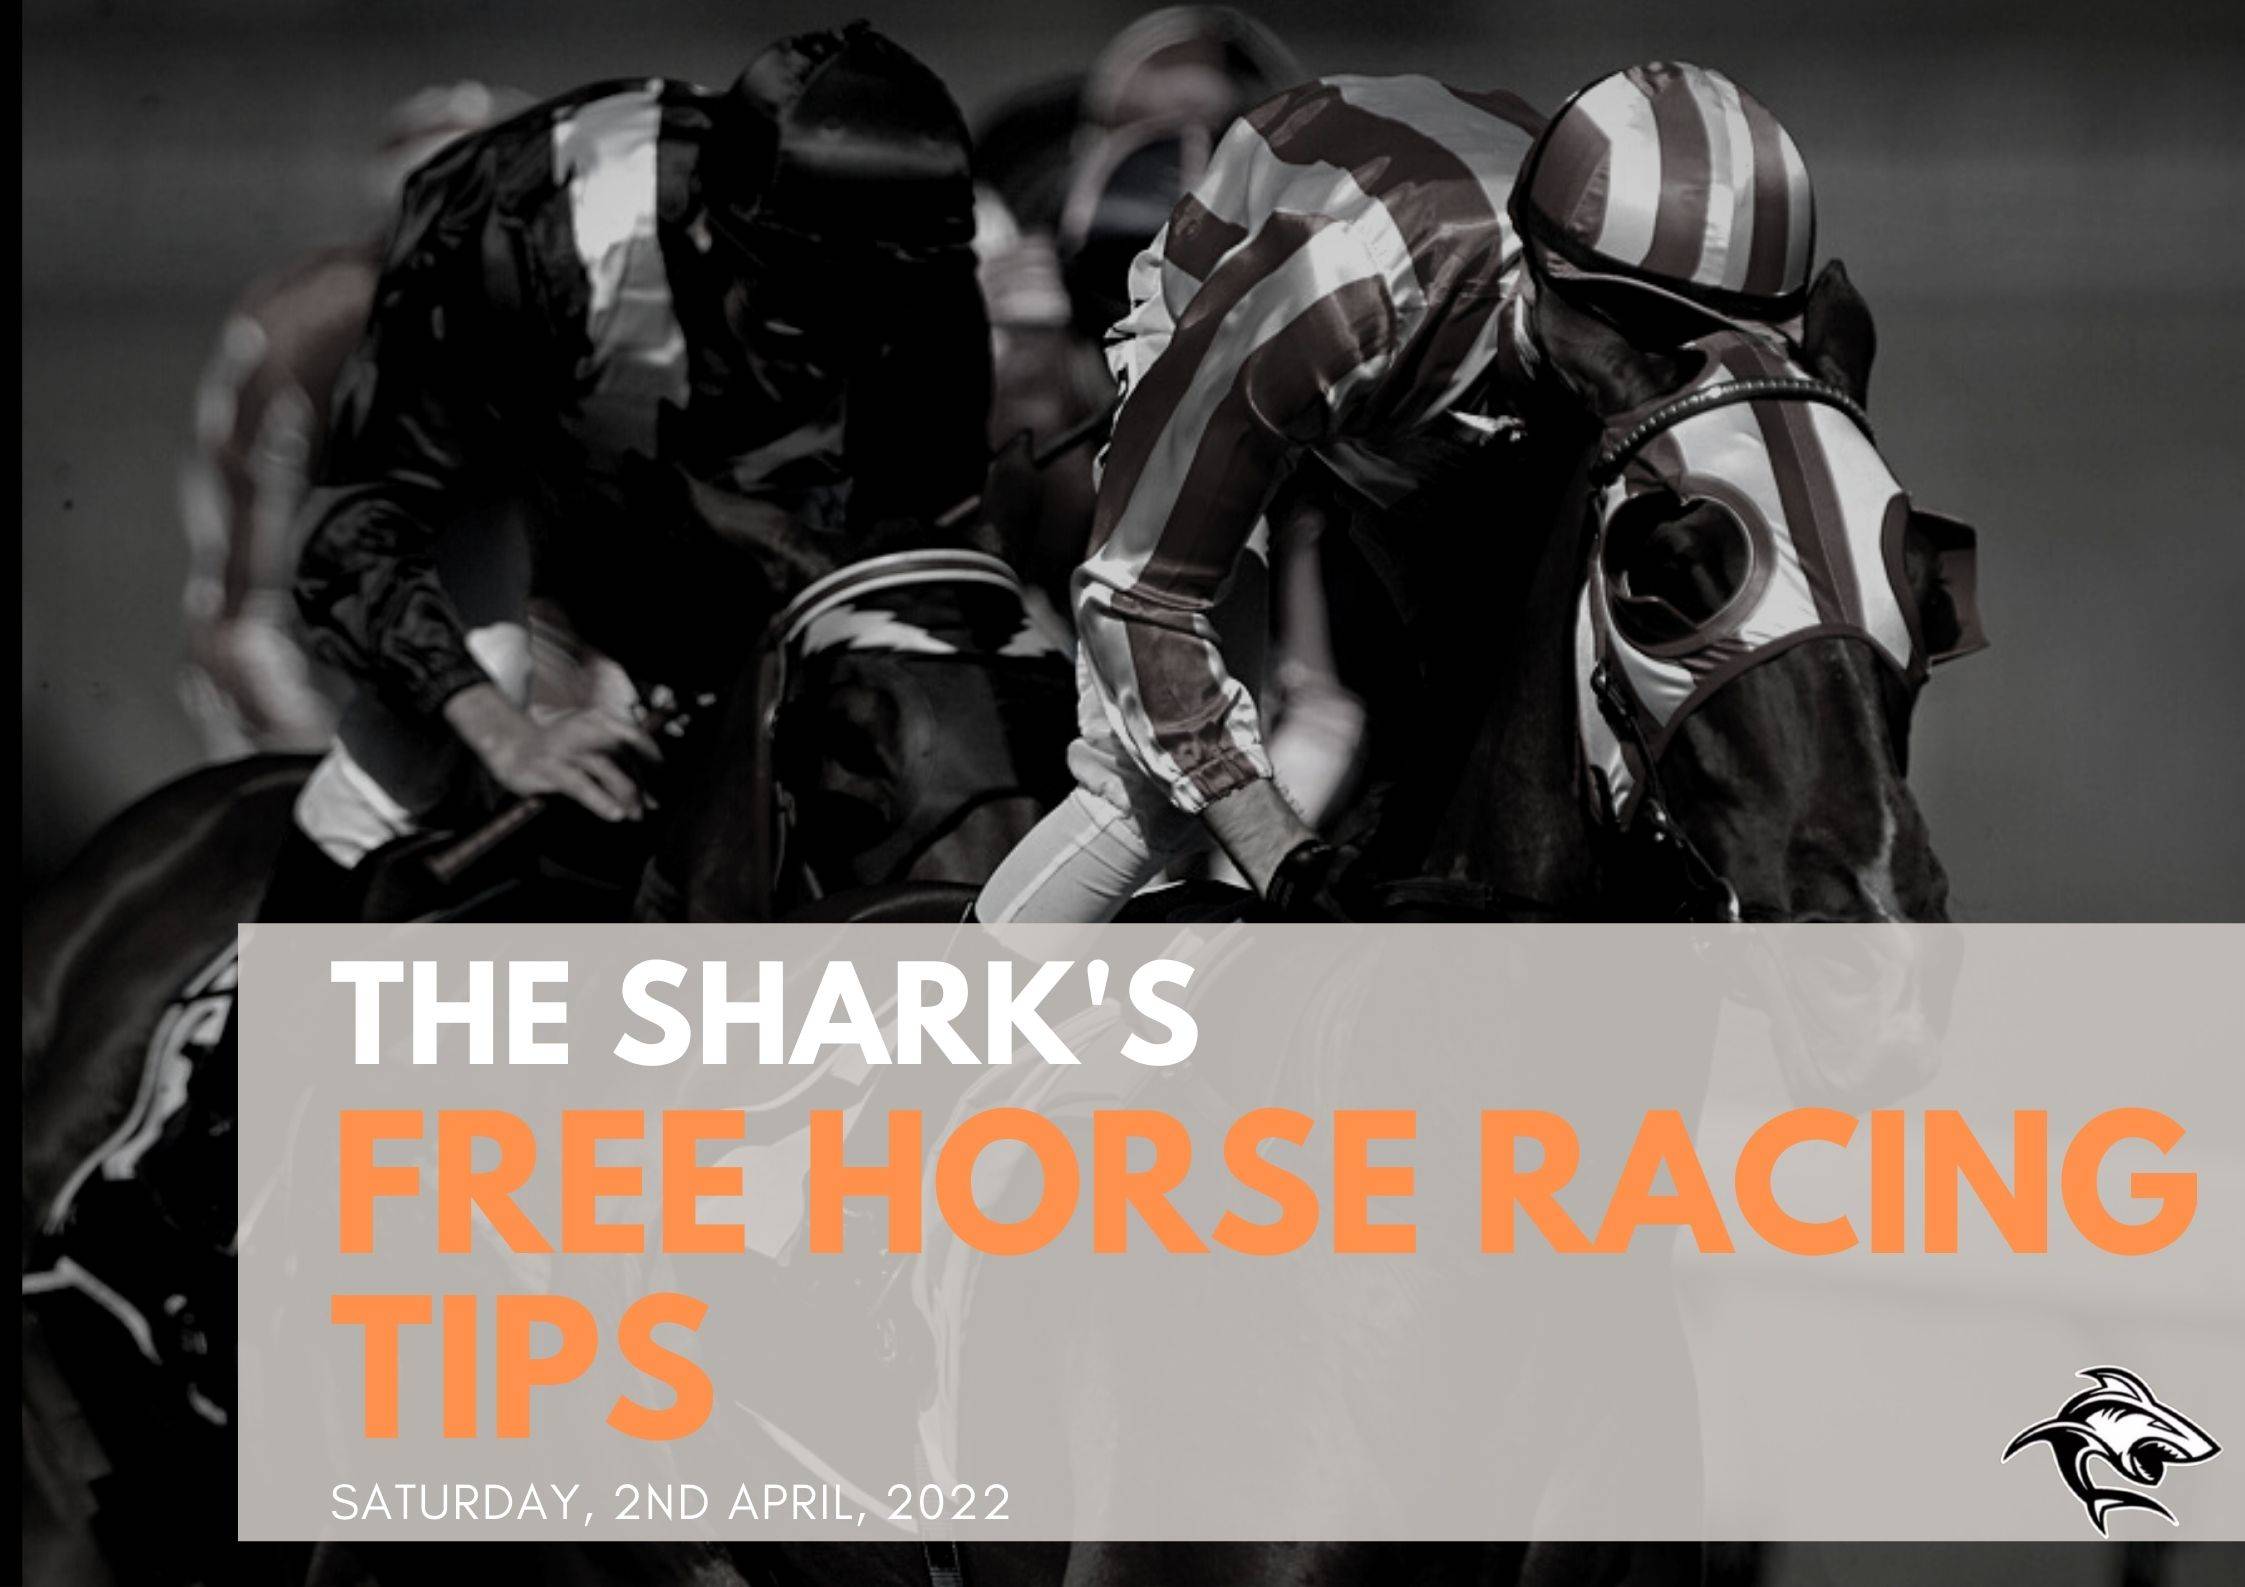 Free Horse Racing Tips - 2nd Apr